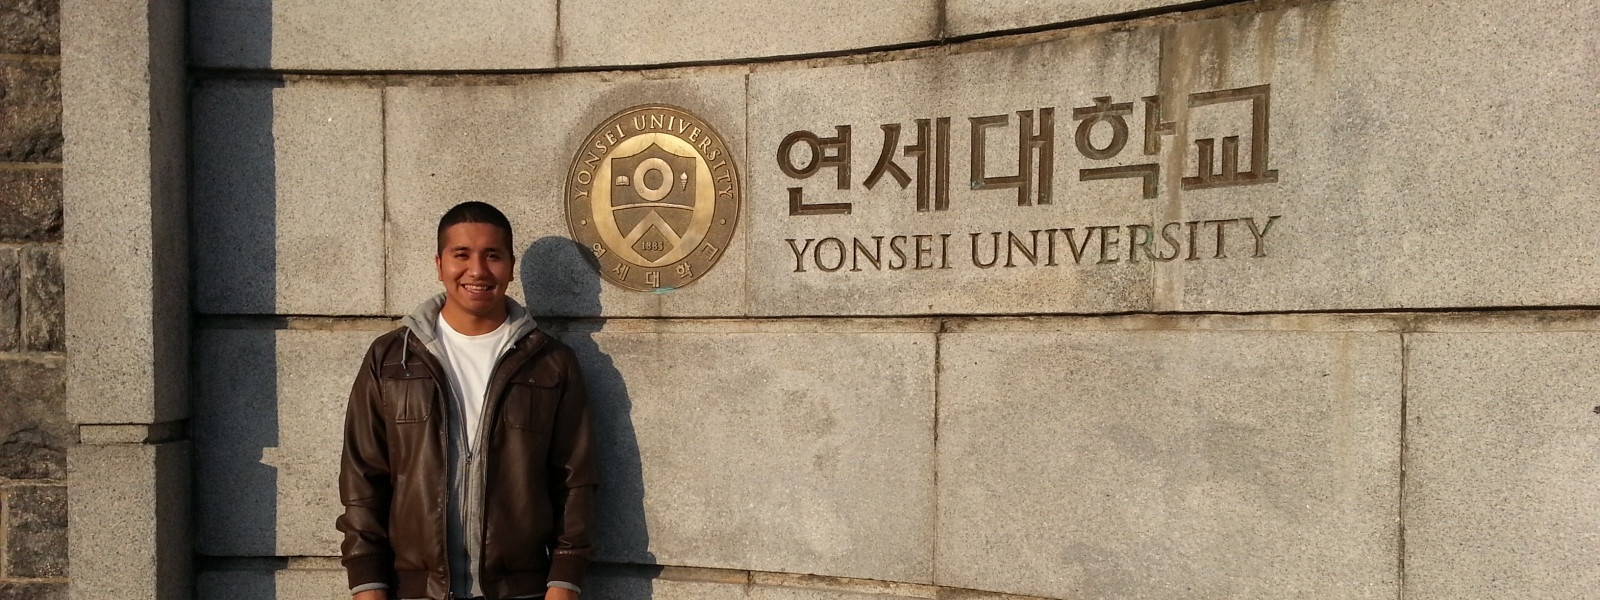 A student poses in front of a Yonsei University sign.